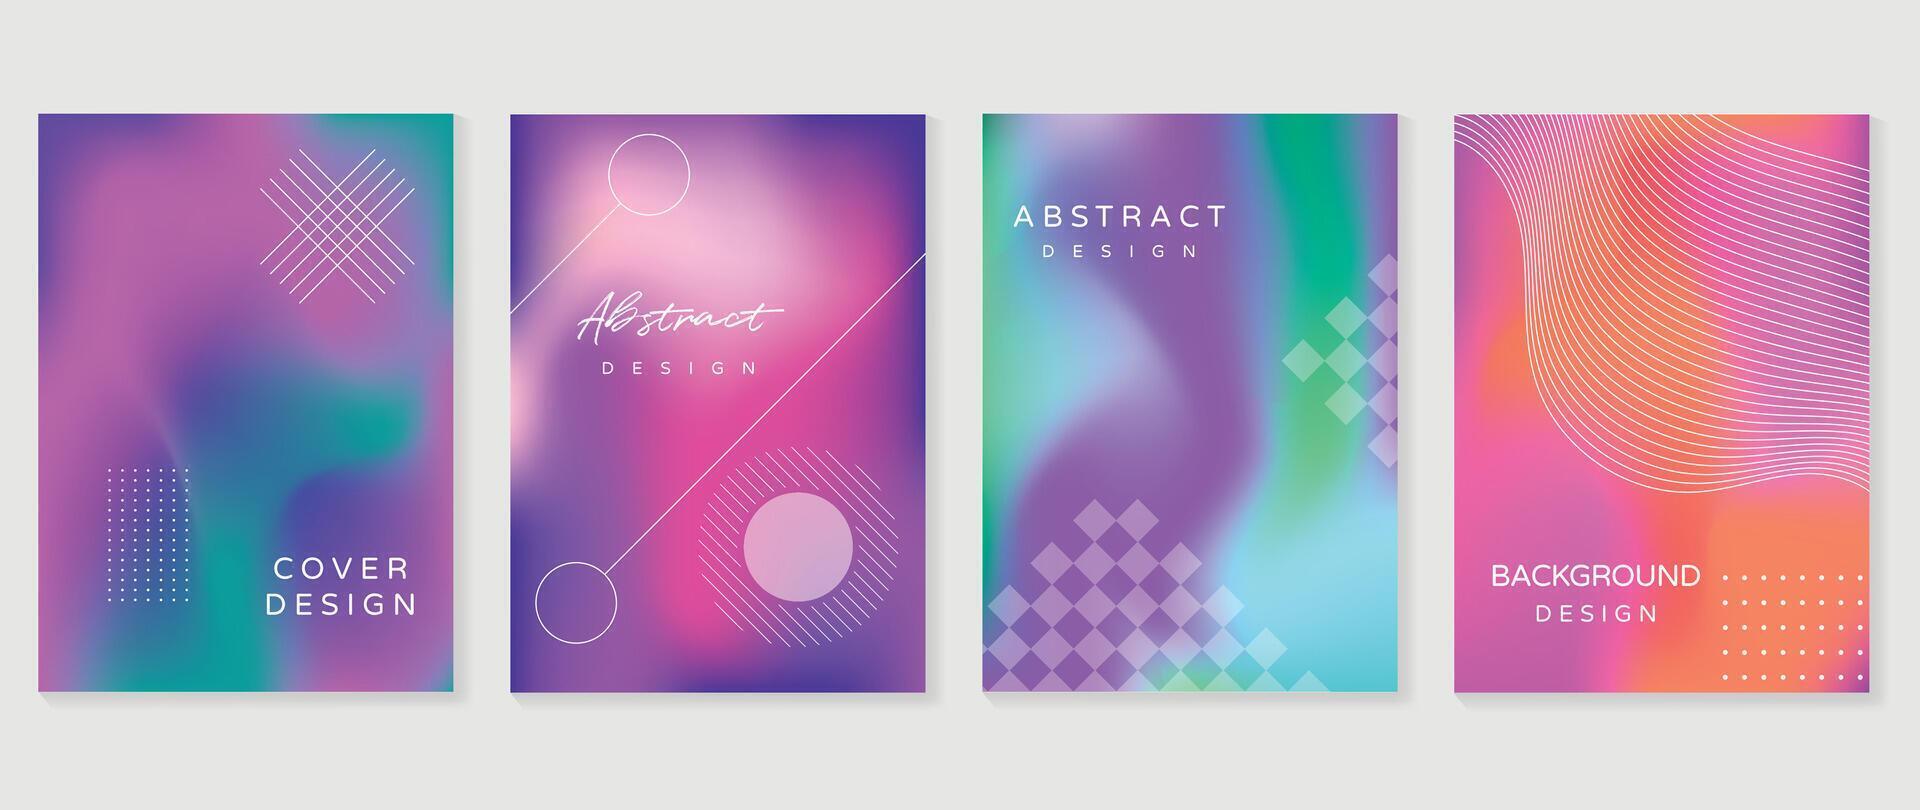 Abstract fluid gradient background vector. Minimalist style cover template with geometric shapes, colorful and liquid color. Modern wallpaper design perfect for social media, idol poster, photo frame. vector